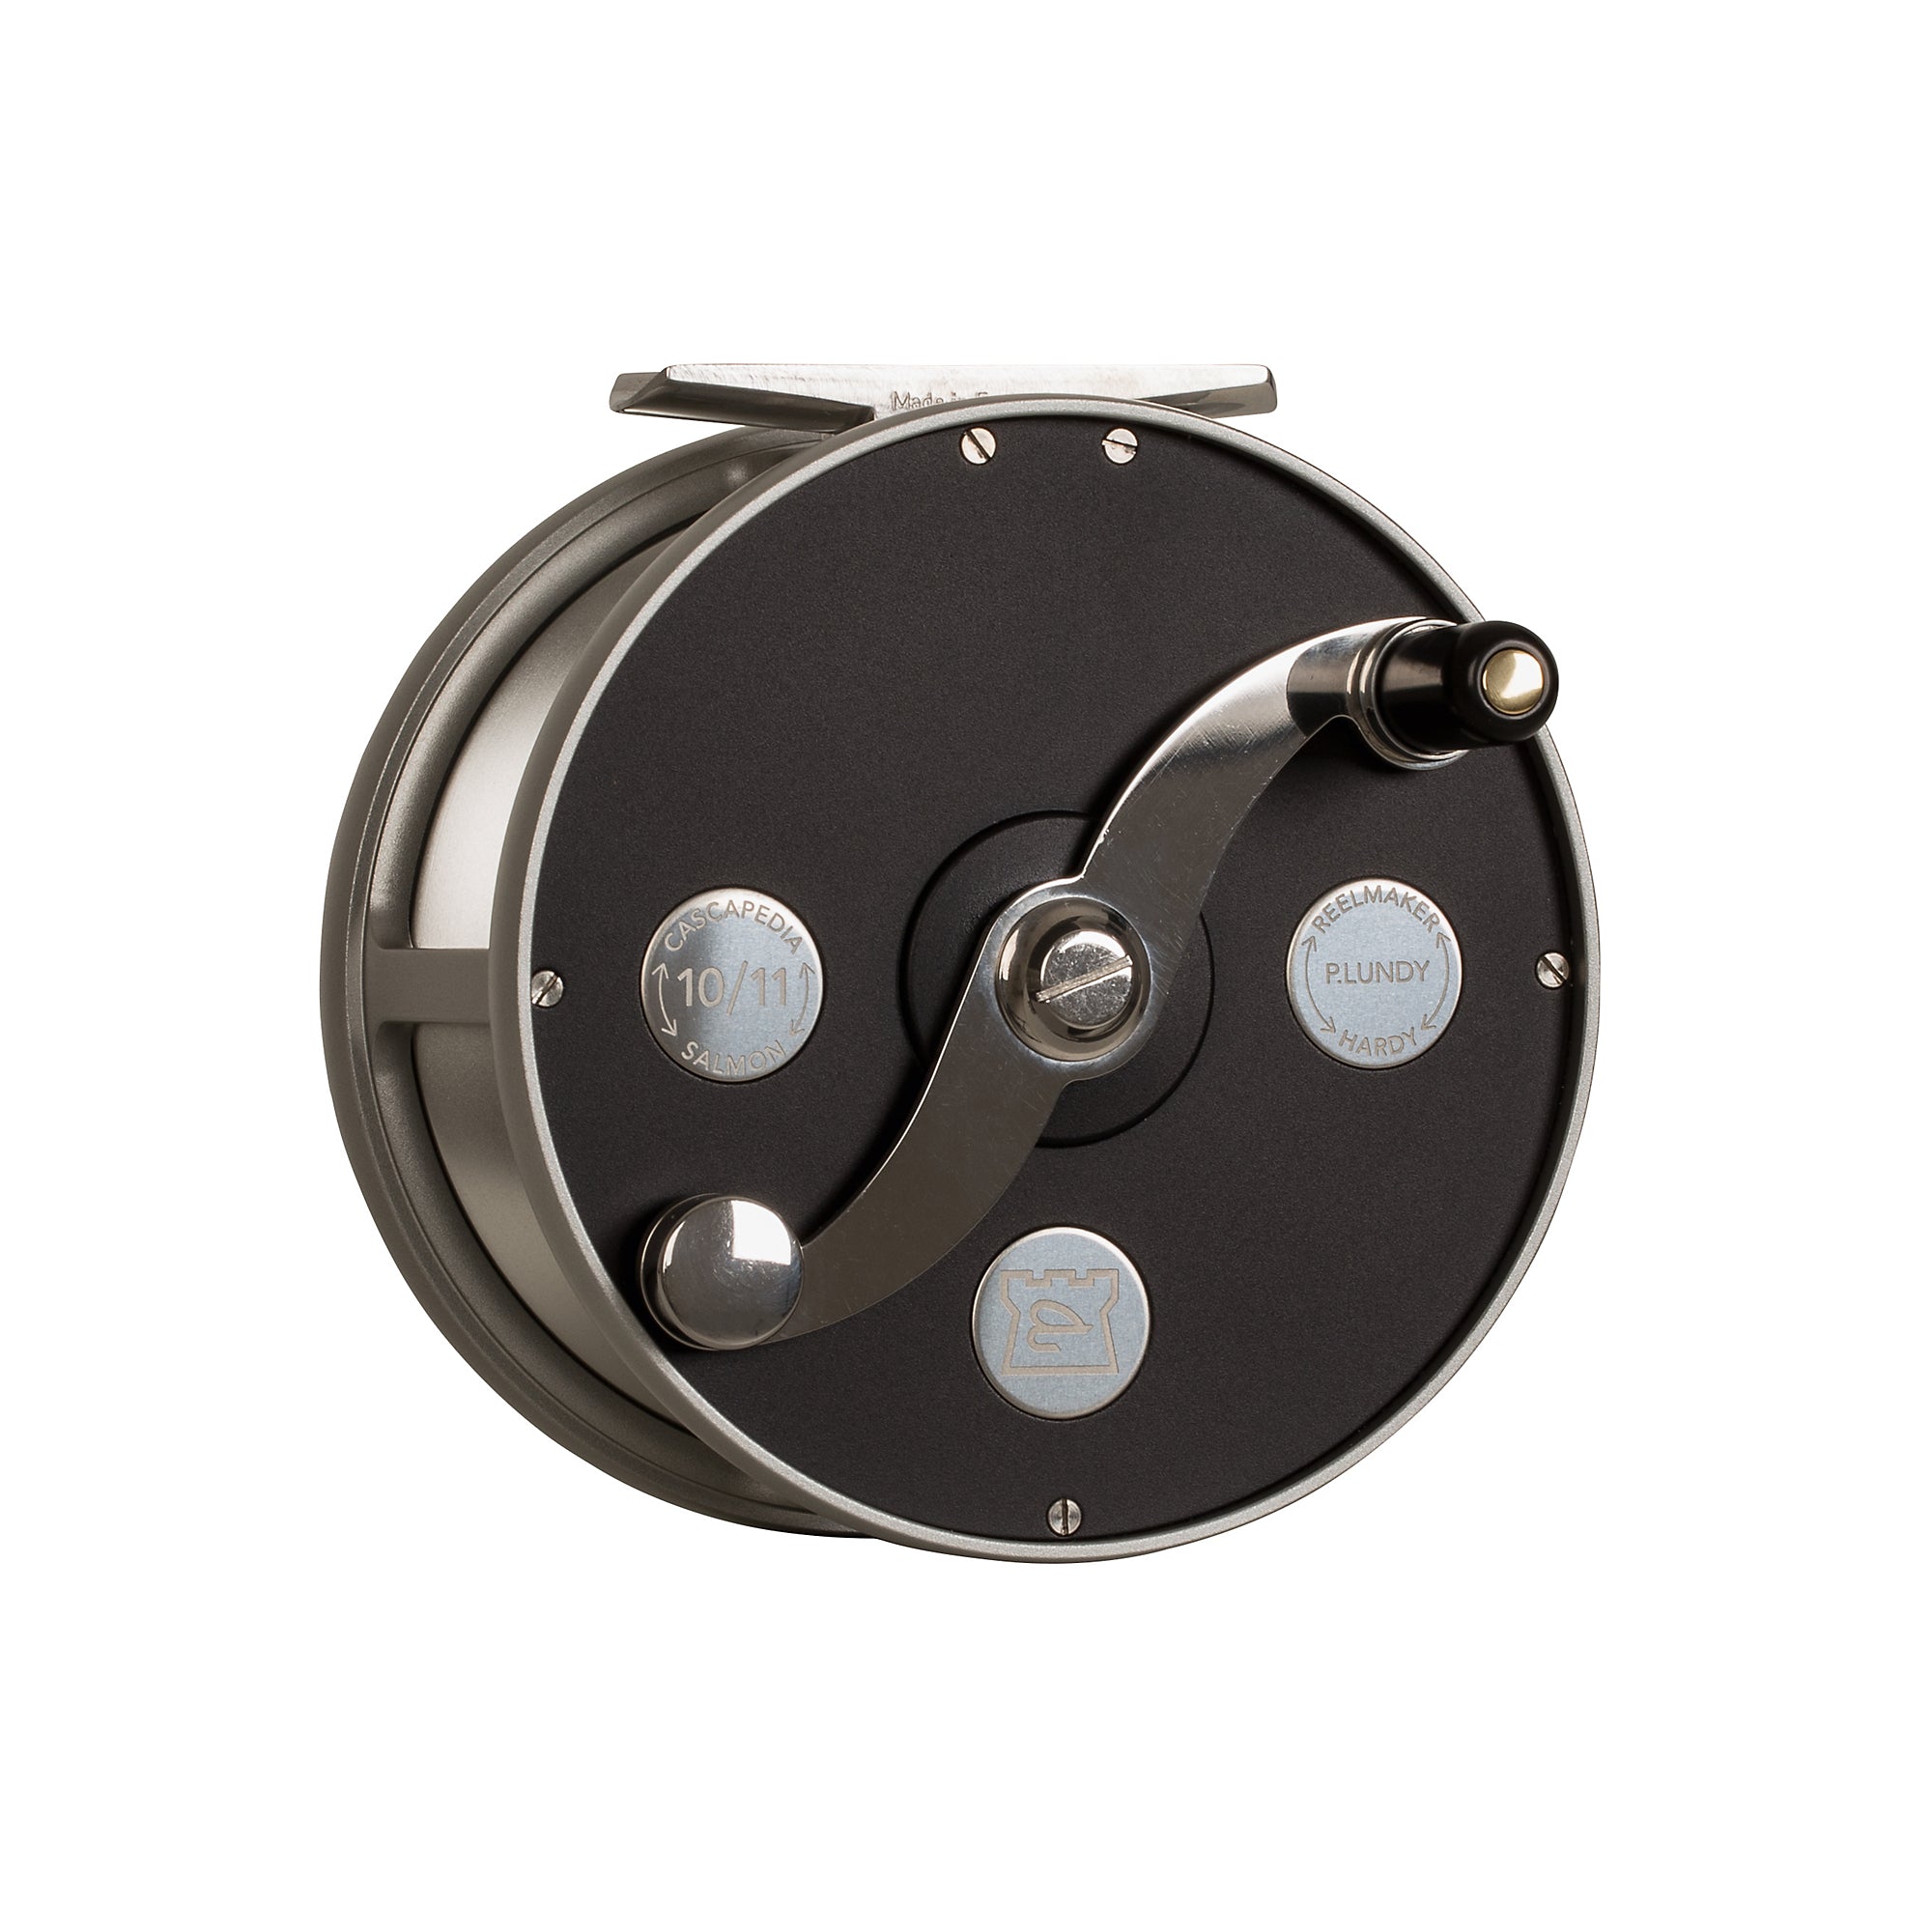 HARDY CASCAPEDIA HERITAGE FLY REEL — Rod And Tackle Limited